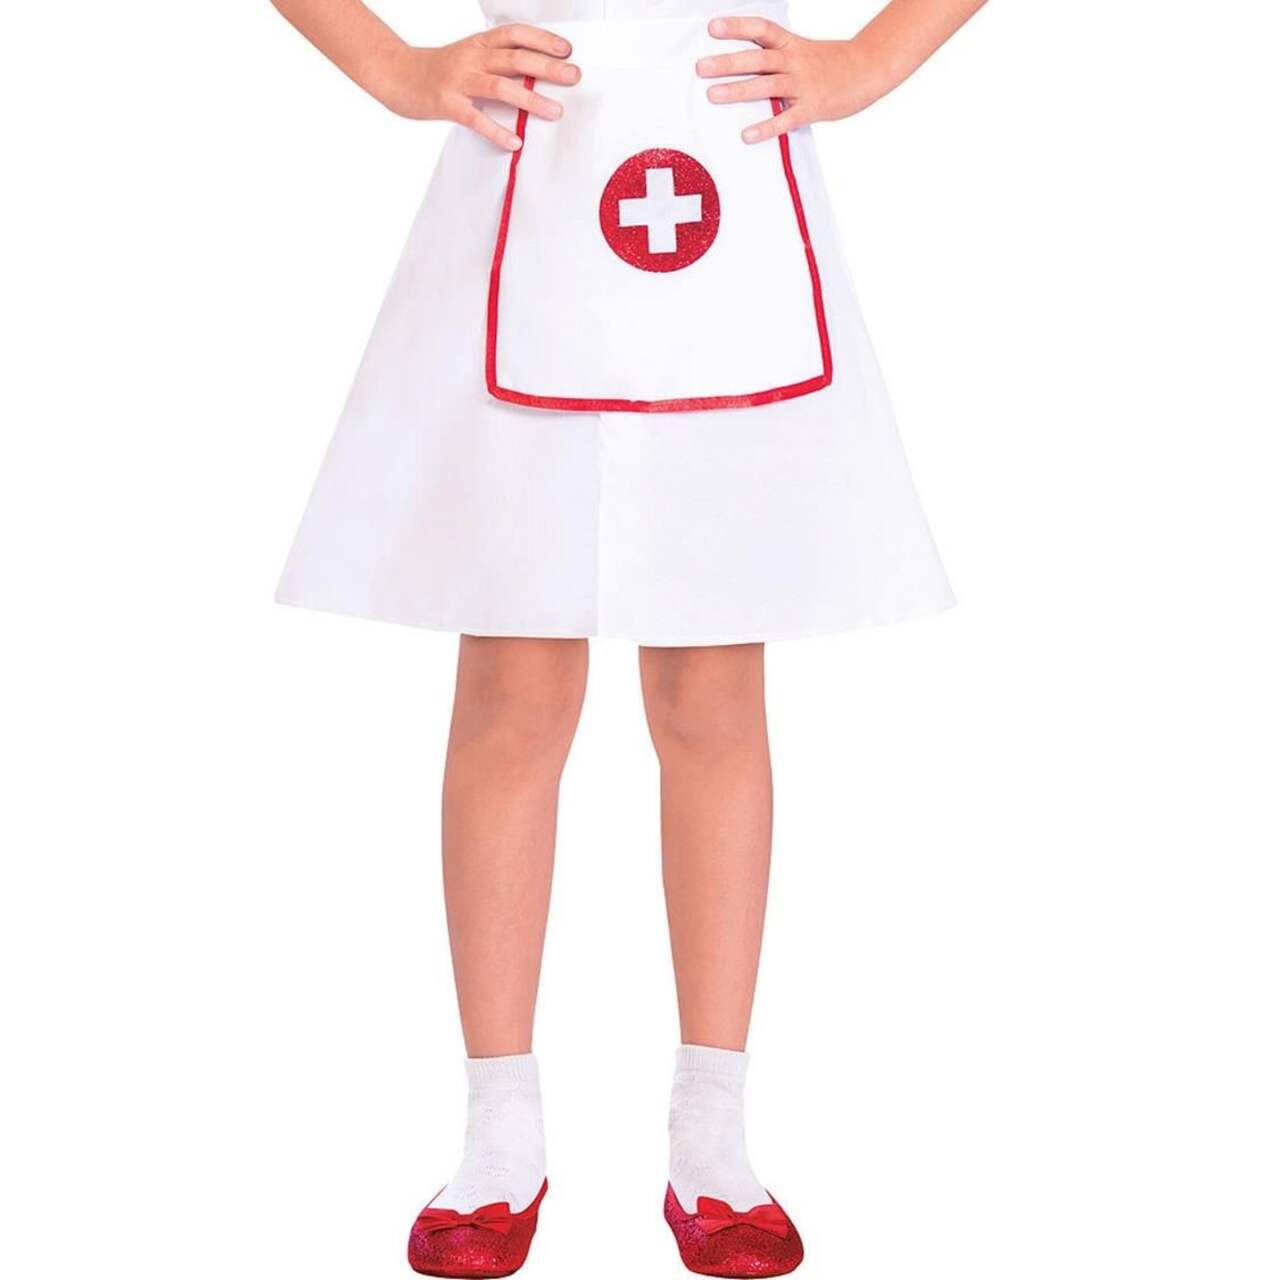 Kids' Nurse White Dress with Hat & Apron Halloween Costume, Assorted Sizes